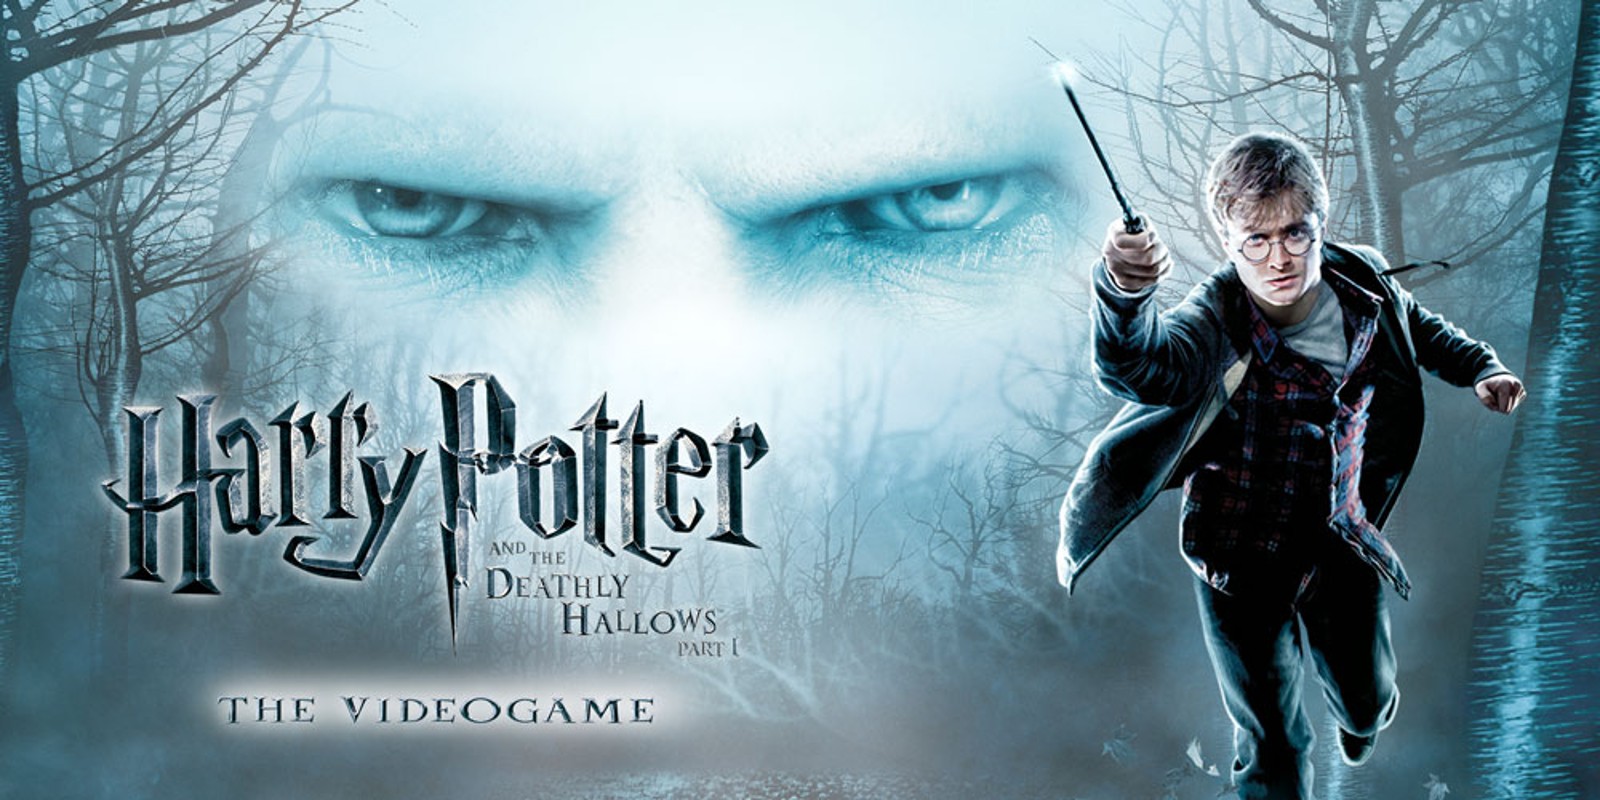 harry potter deathly hallows part 1 online hd free